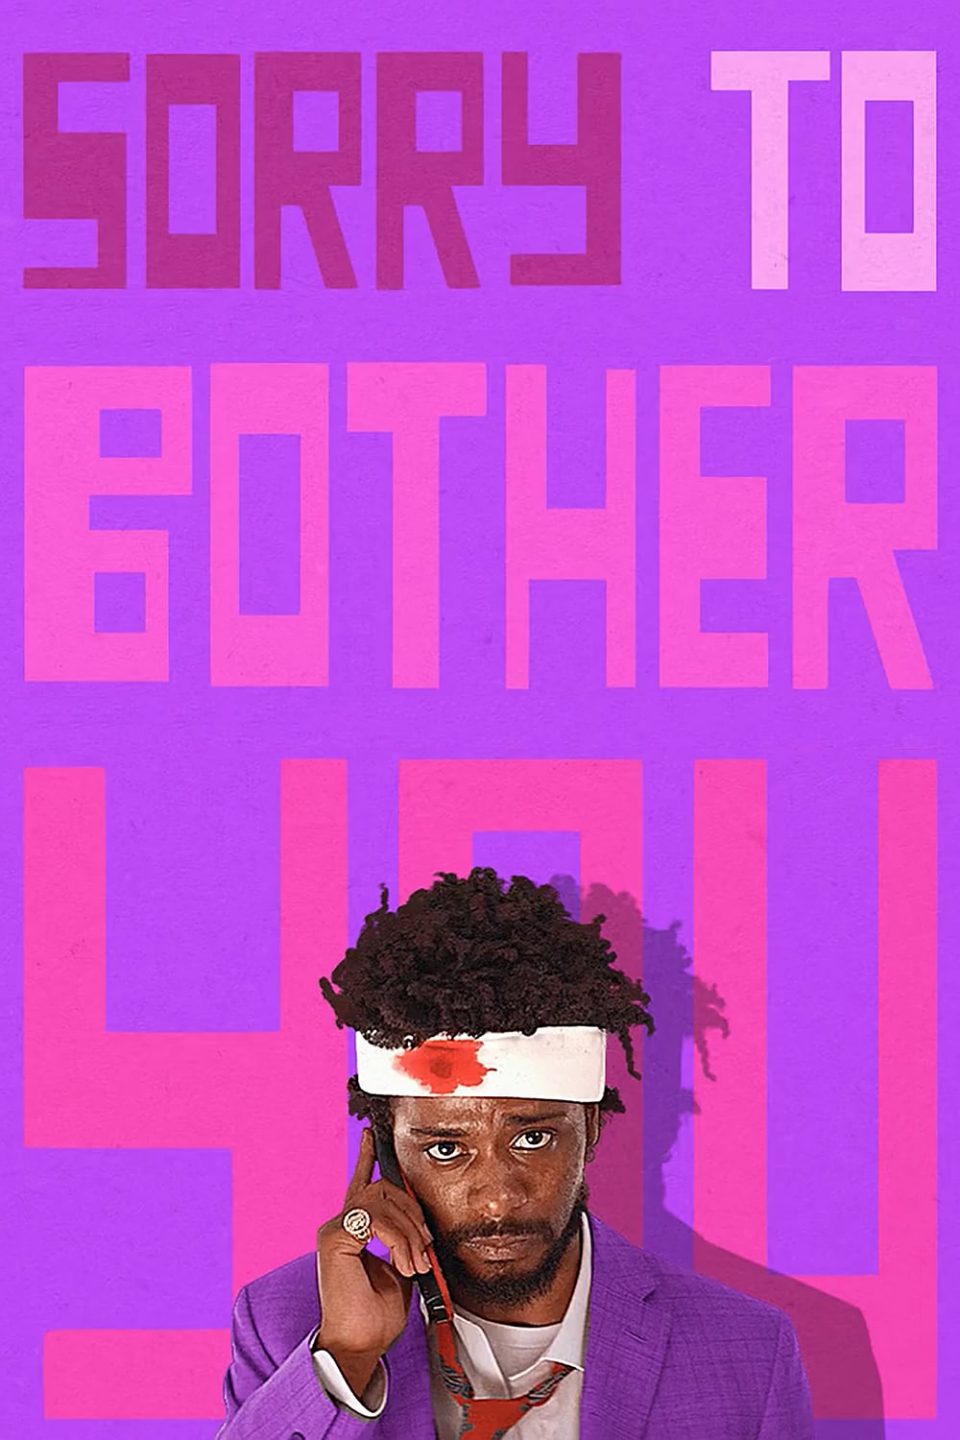 Poster for the movie "Sorry to Bother You"